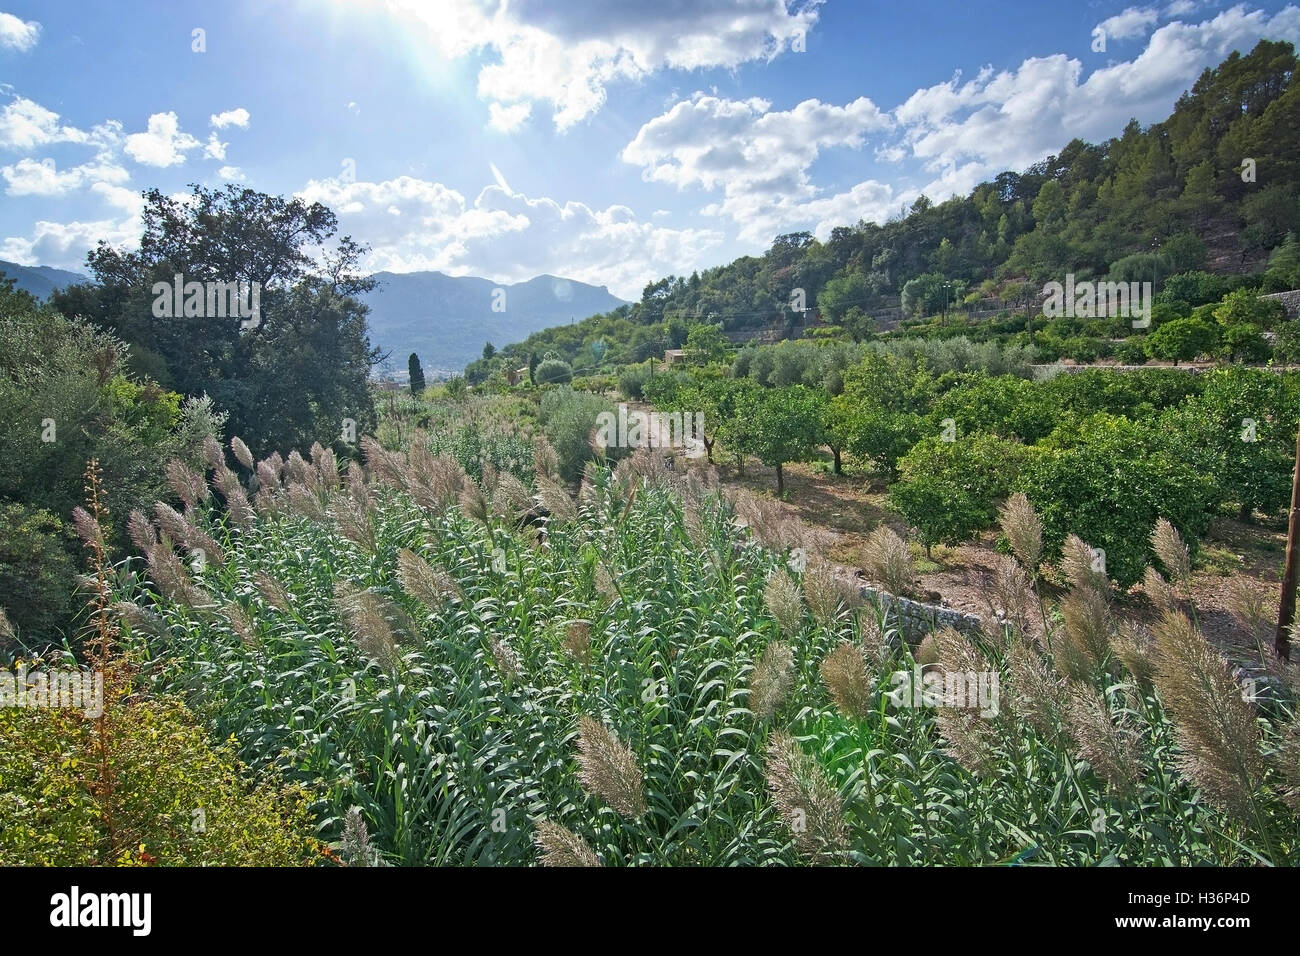 Terraced landscape with reeds and mountains in Fornalutx, Mallorca, Balearic islands, Spain. Stock Photo